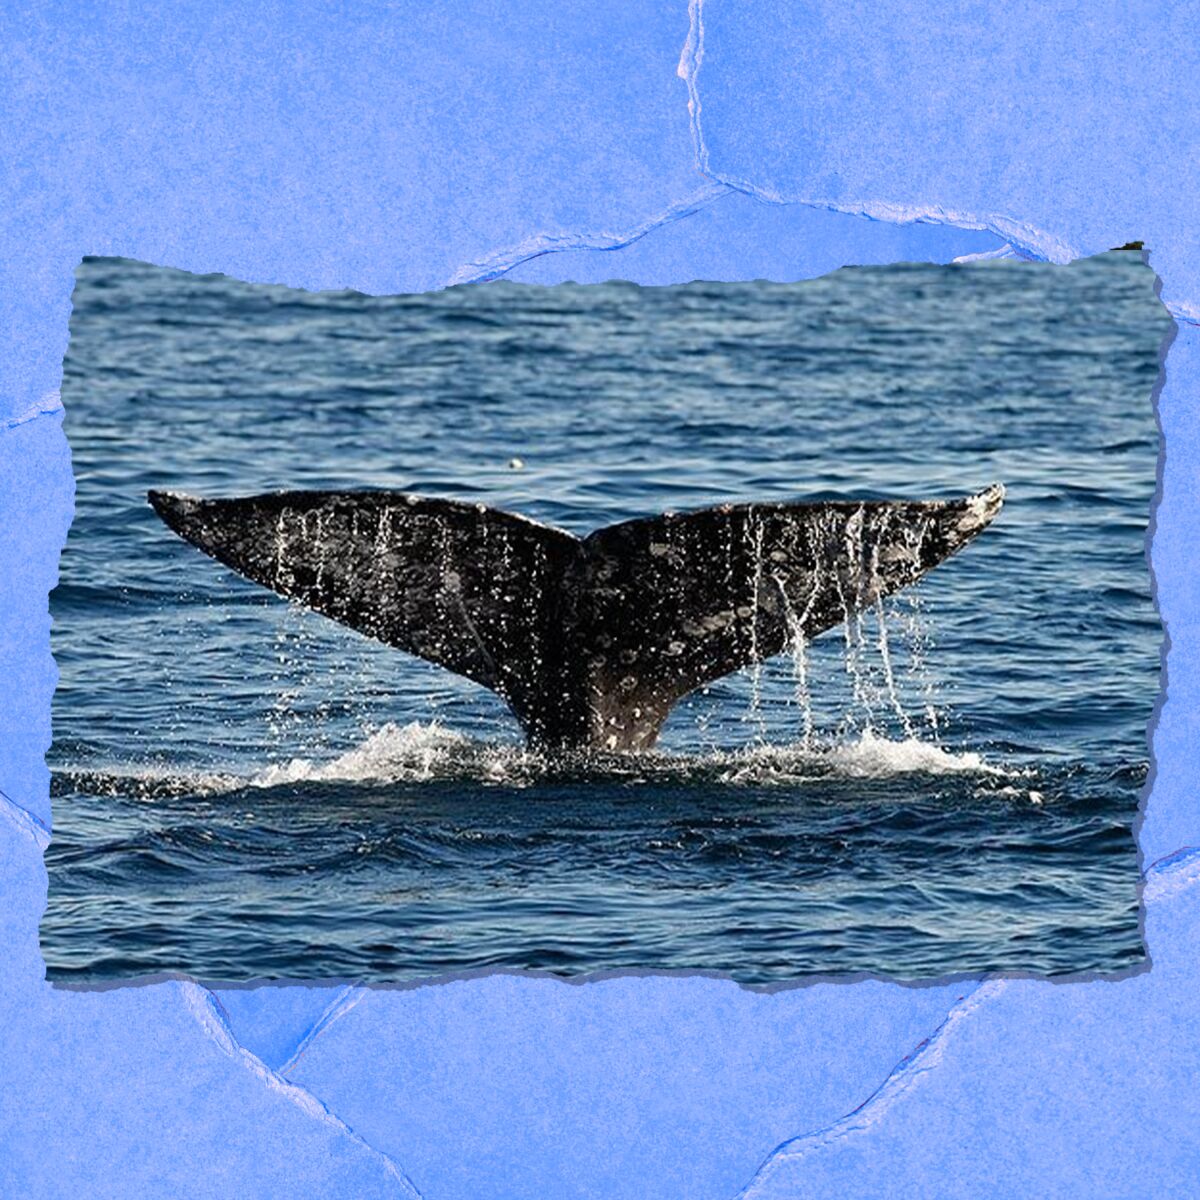 A whale's tale is visible in the ocean.